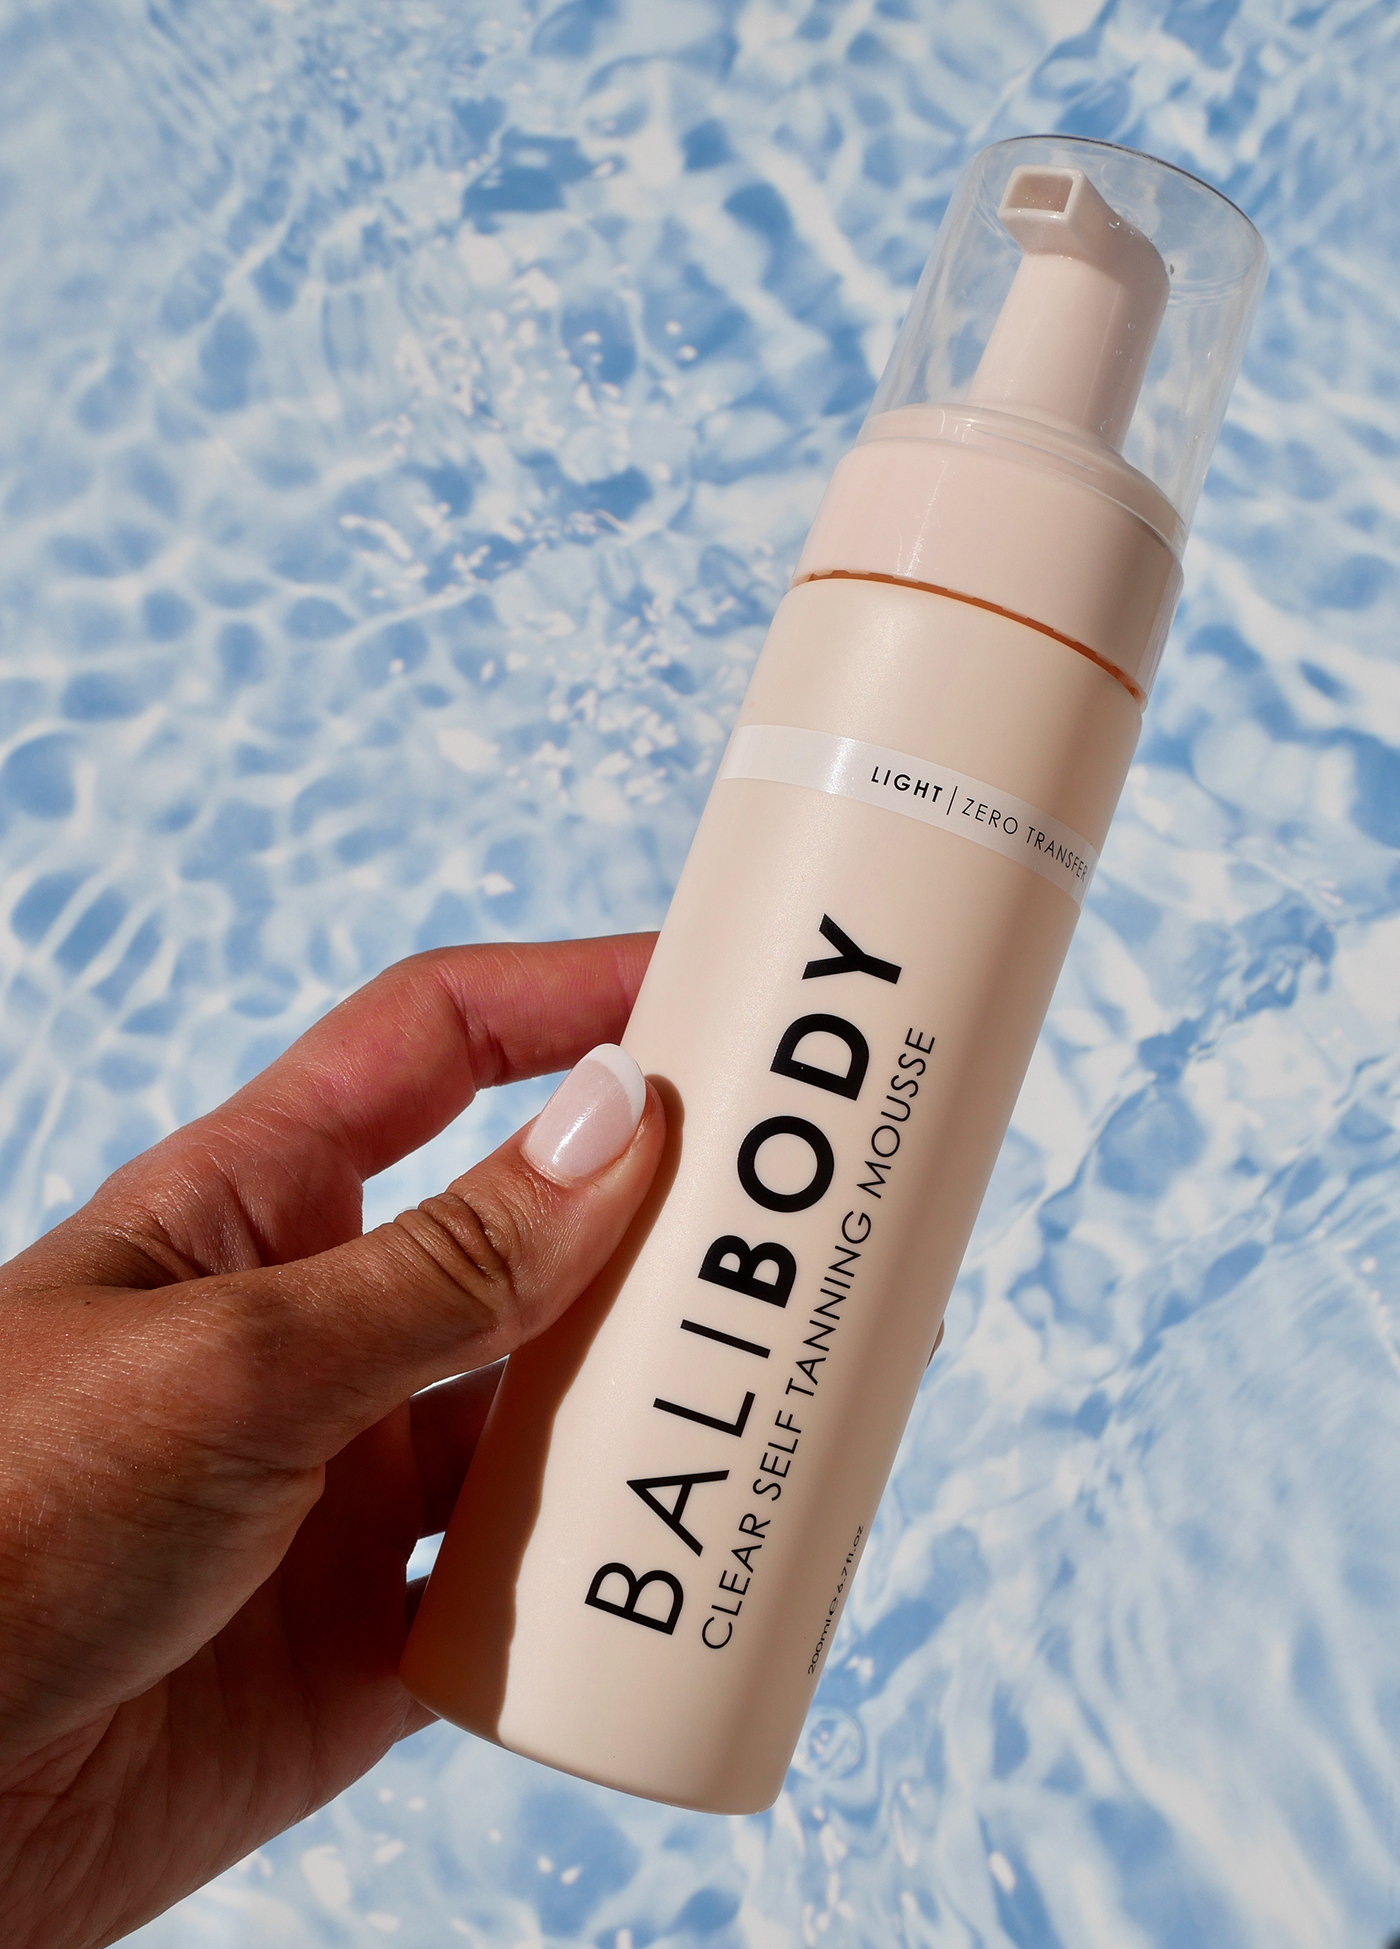 Bali Body - Before & after using Bali Body Face Tan Water